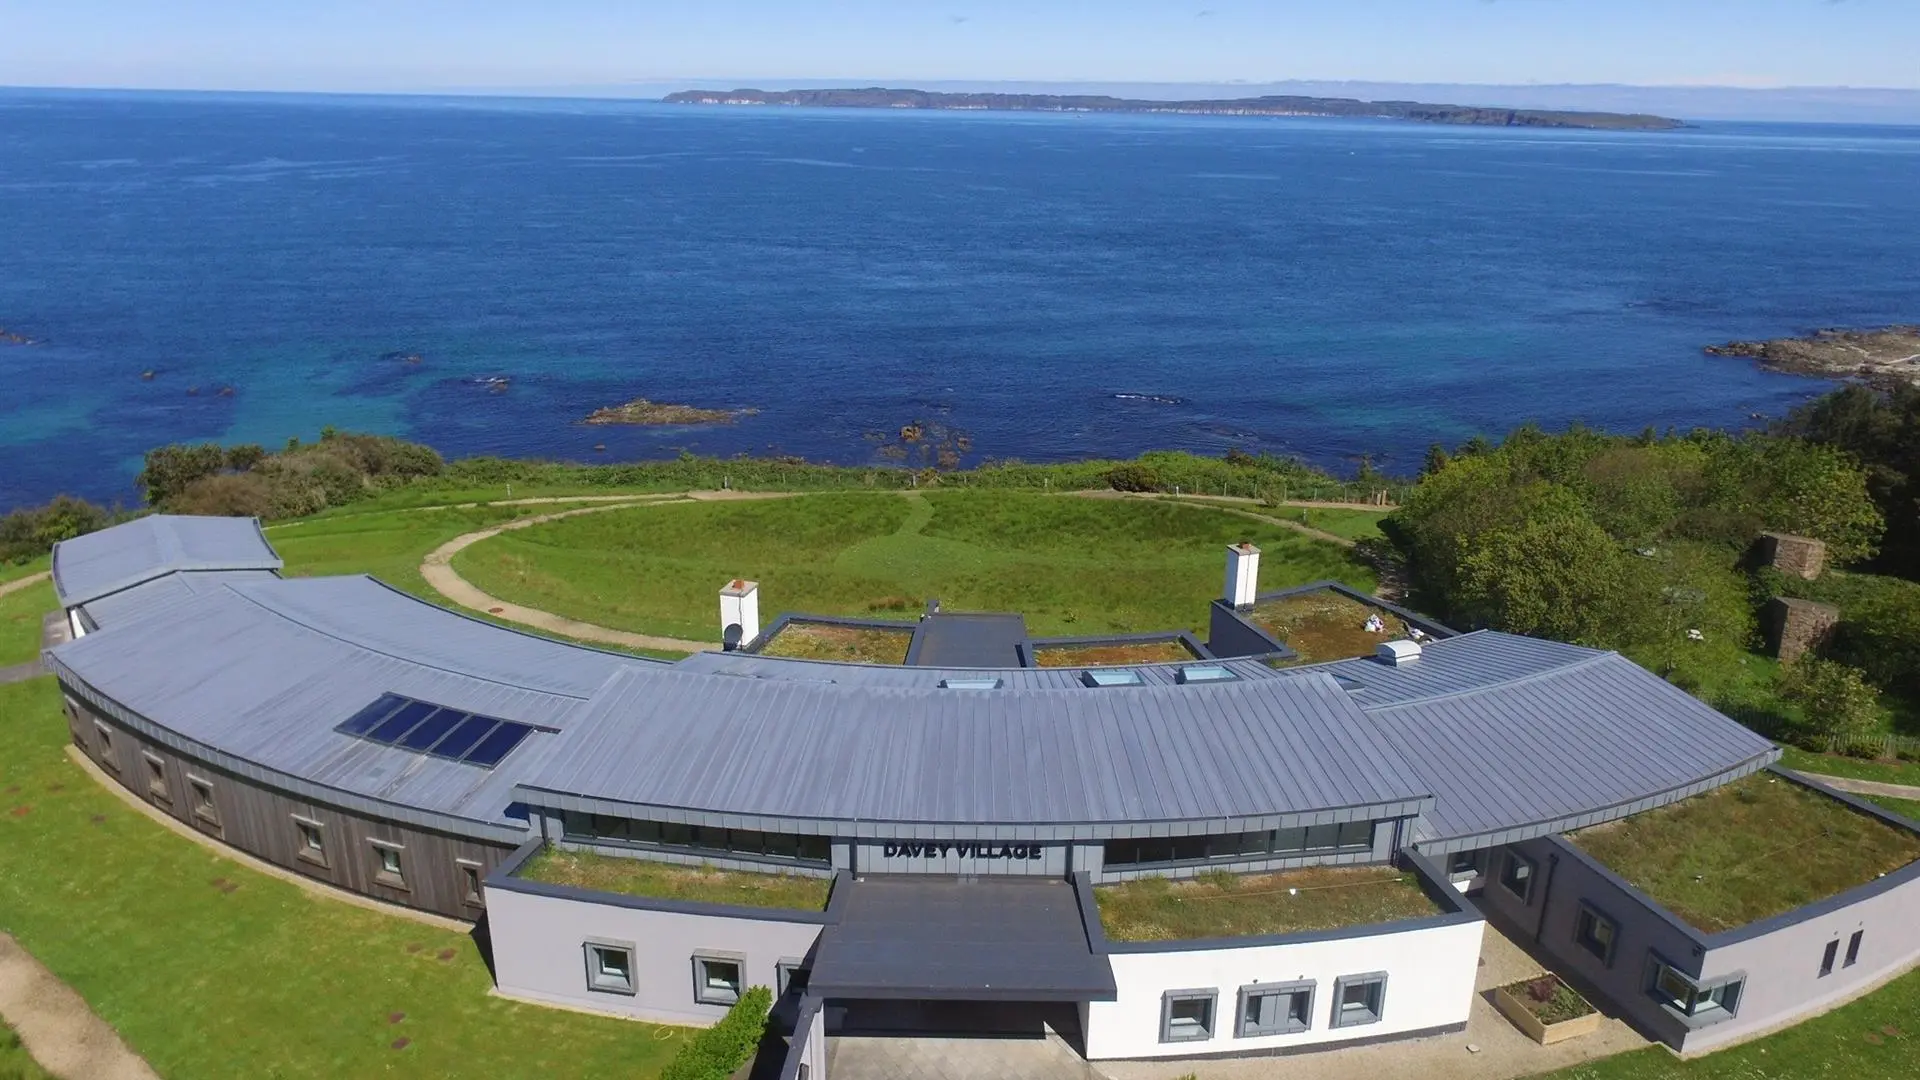 Aerial view of a meditation center located on the north coast of Ireland